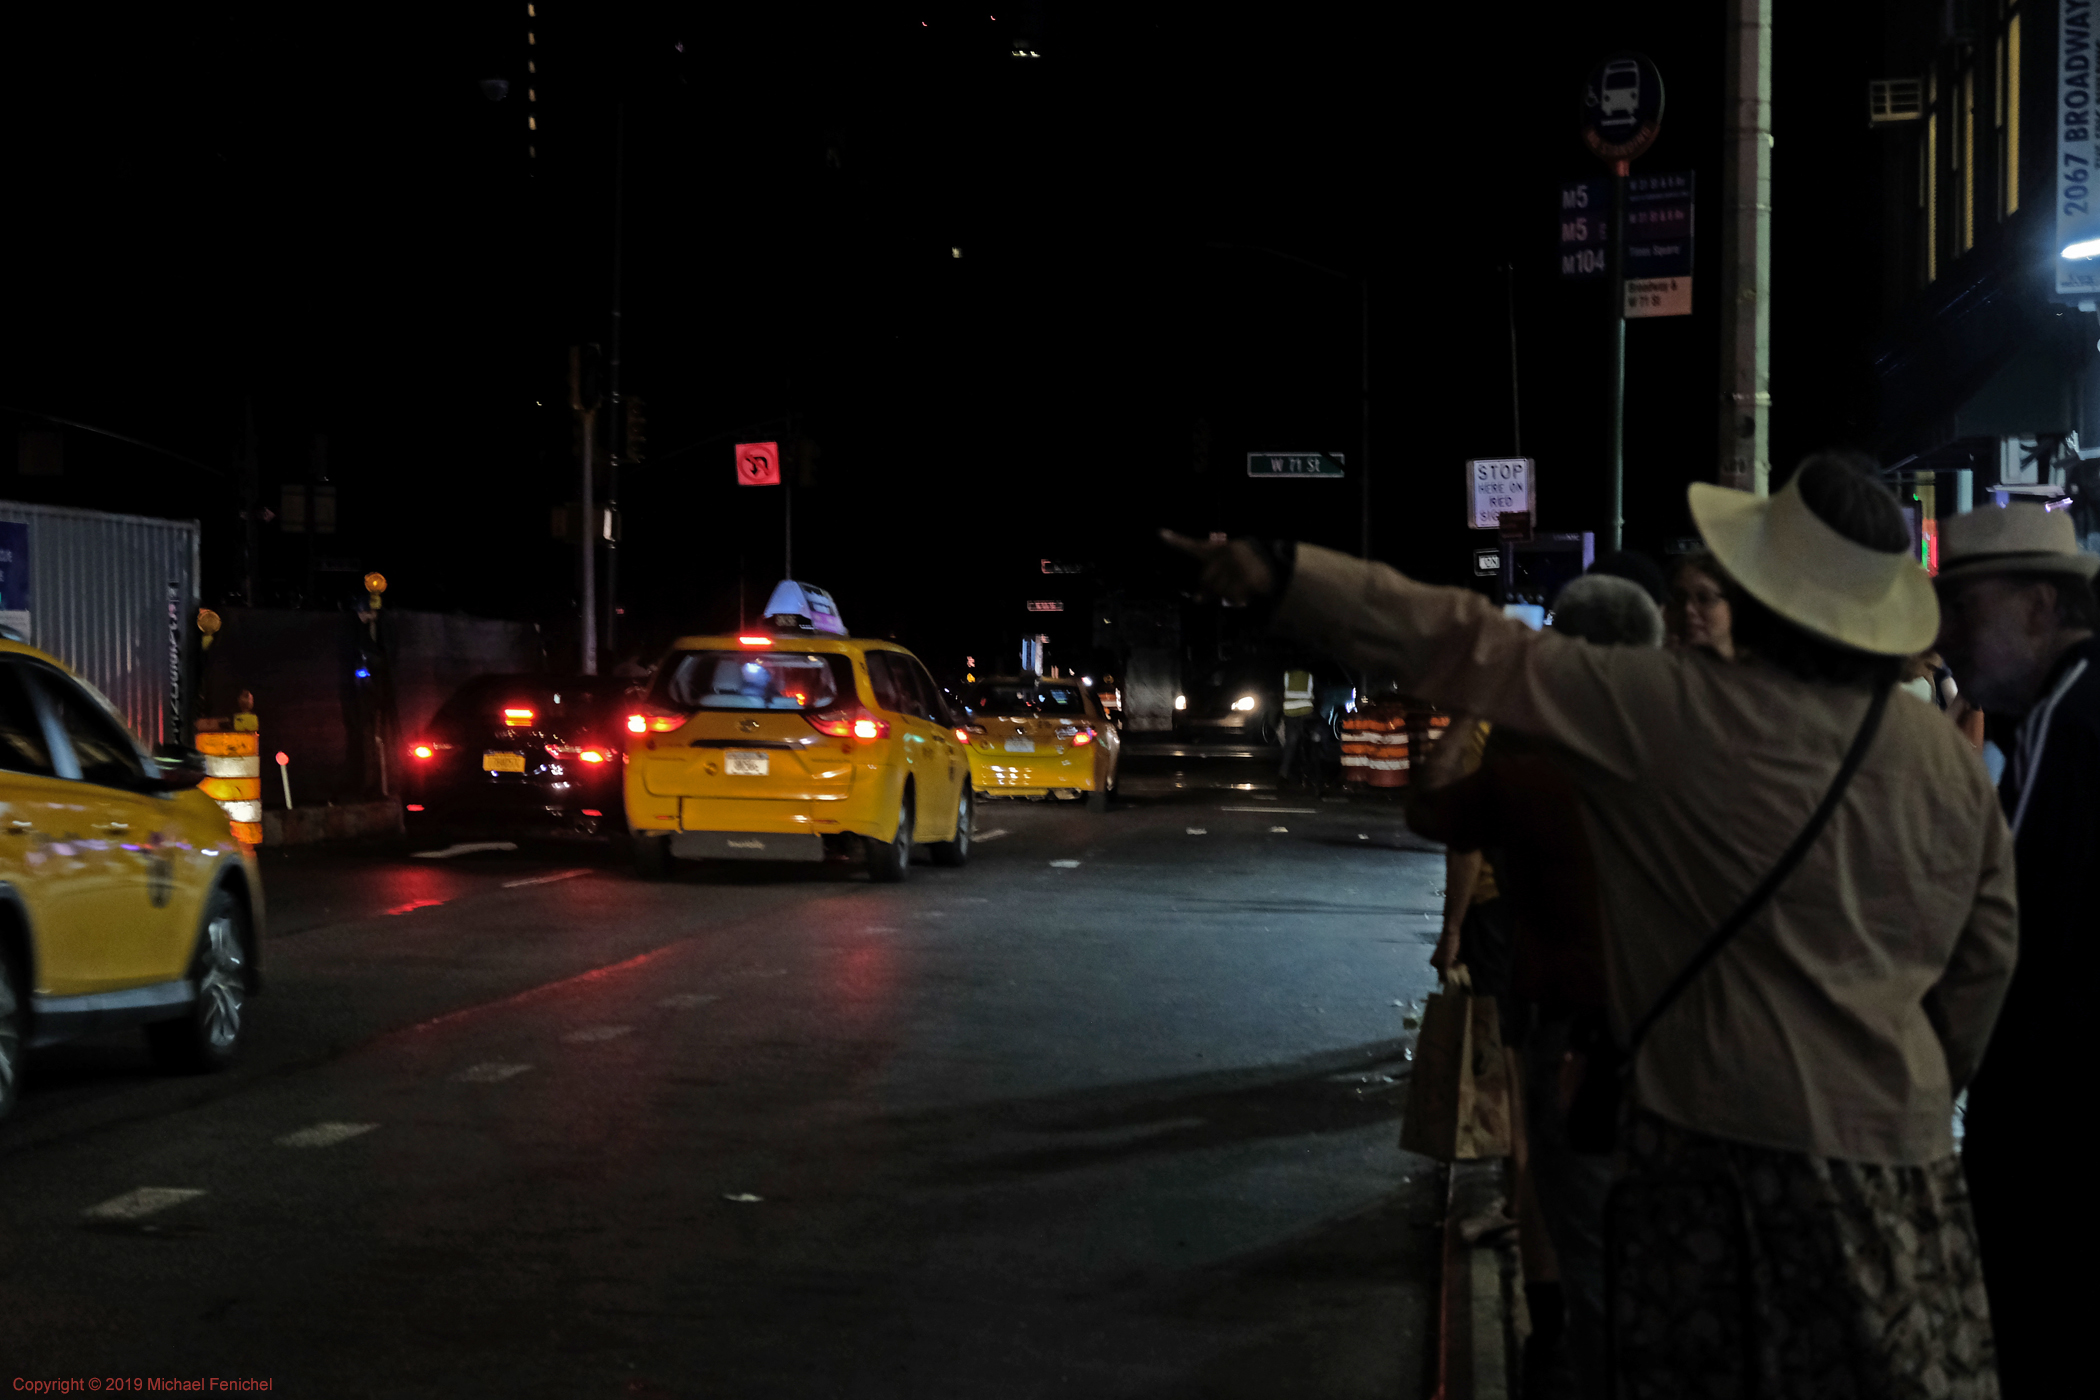 Trying to Hail a Taxi During a Blackout